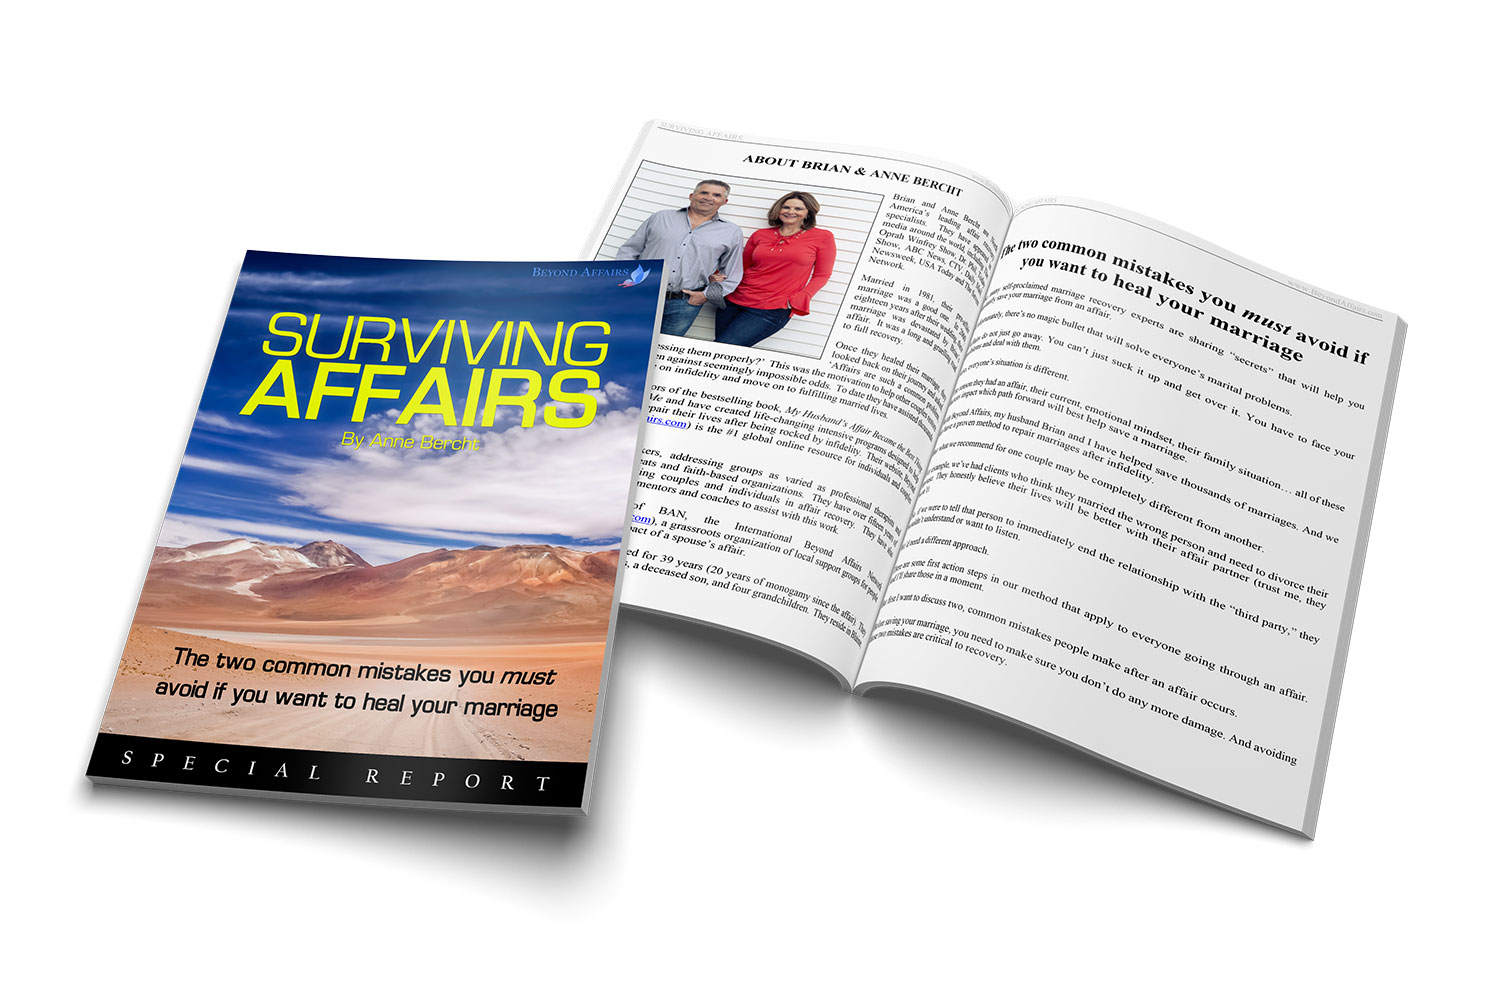 Beyond Affairs special report titled Surviving Affairs The two common mistakes you must avoid if you want to heal your marriage